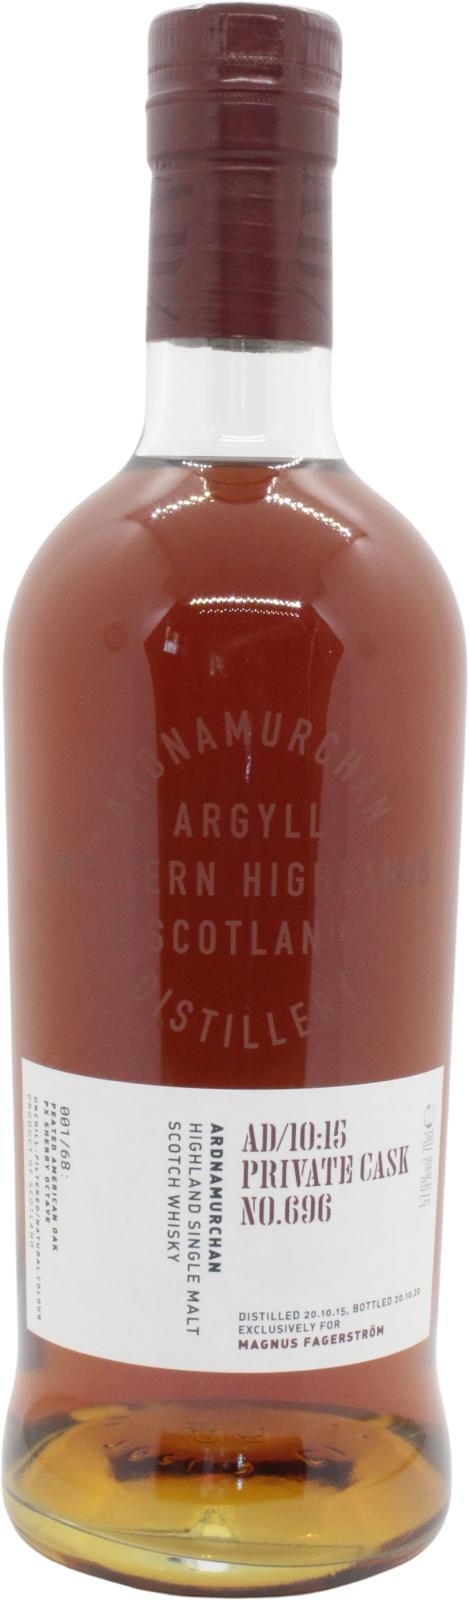 Ardnamurchan 2015 AD 10:15 Private Cask No.696 Magnus Fagerstrom 57.9% 700ml